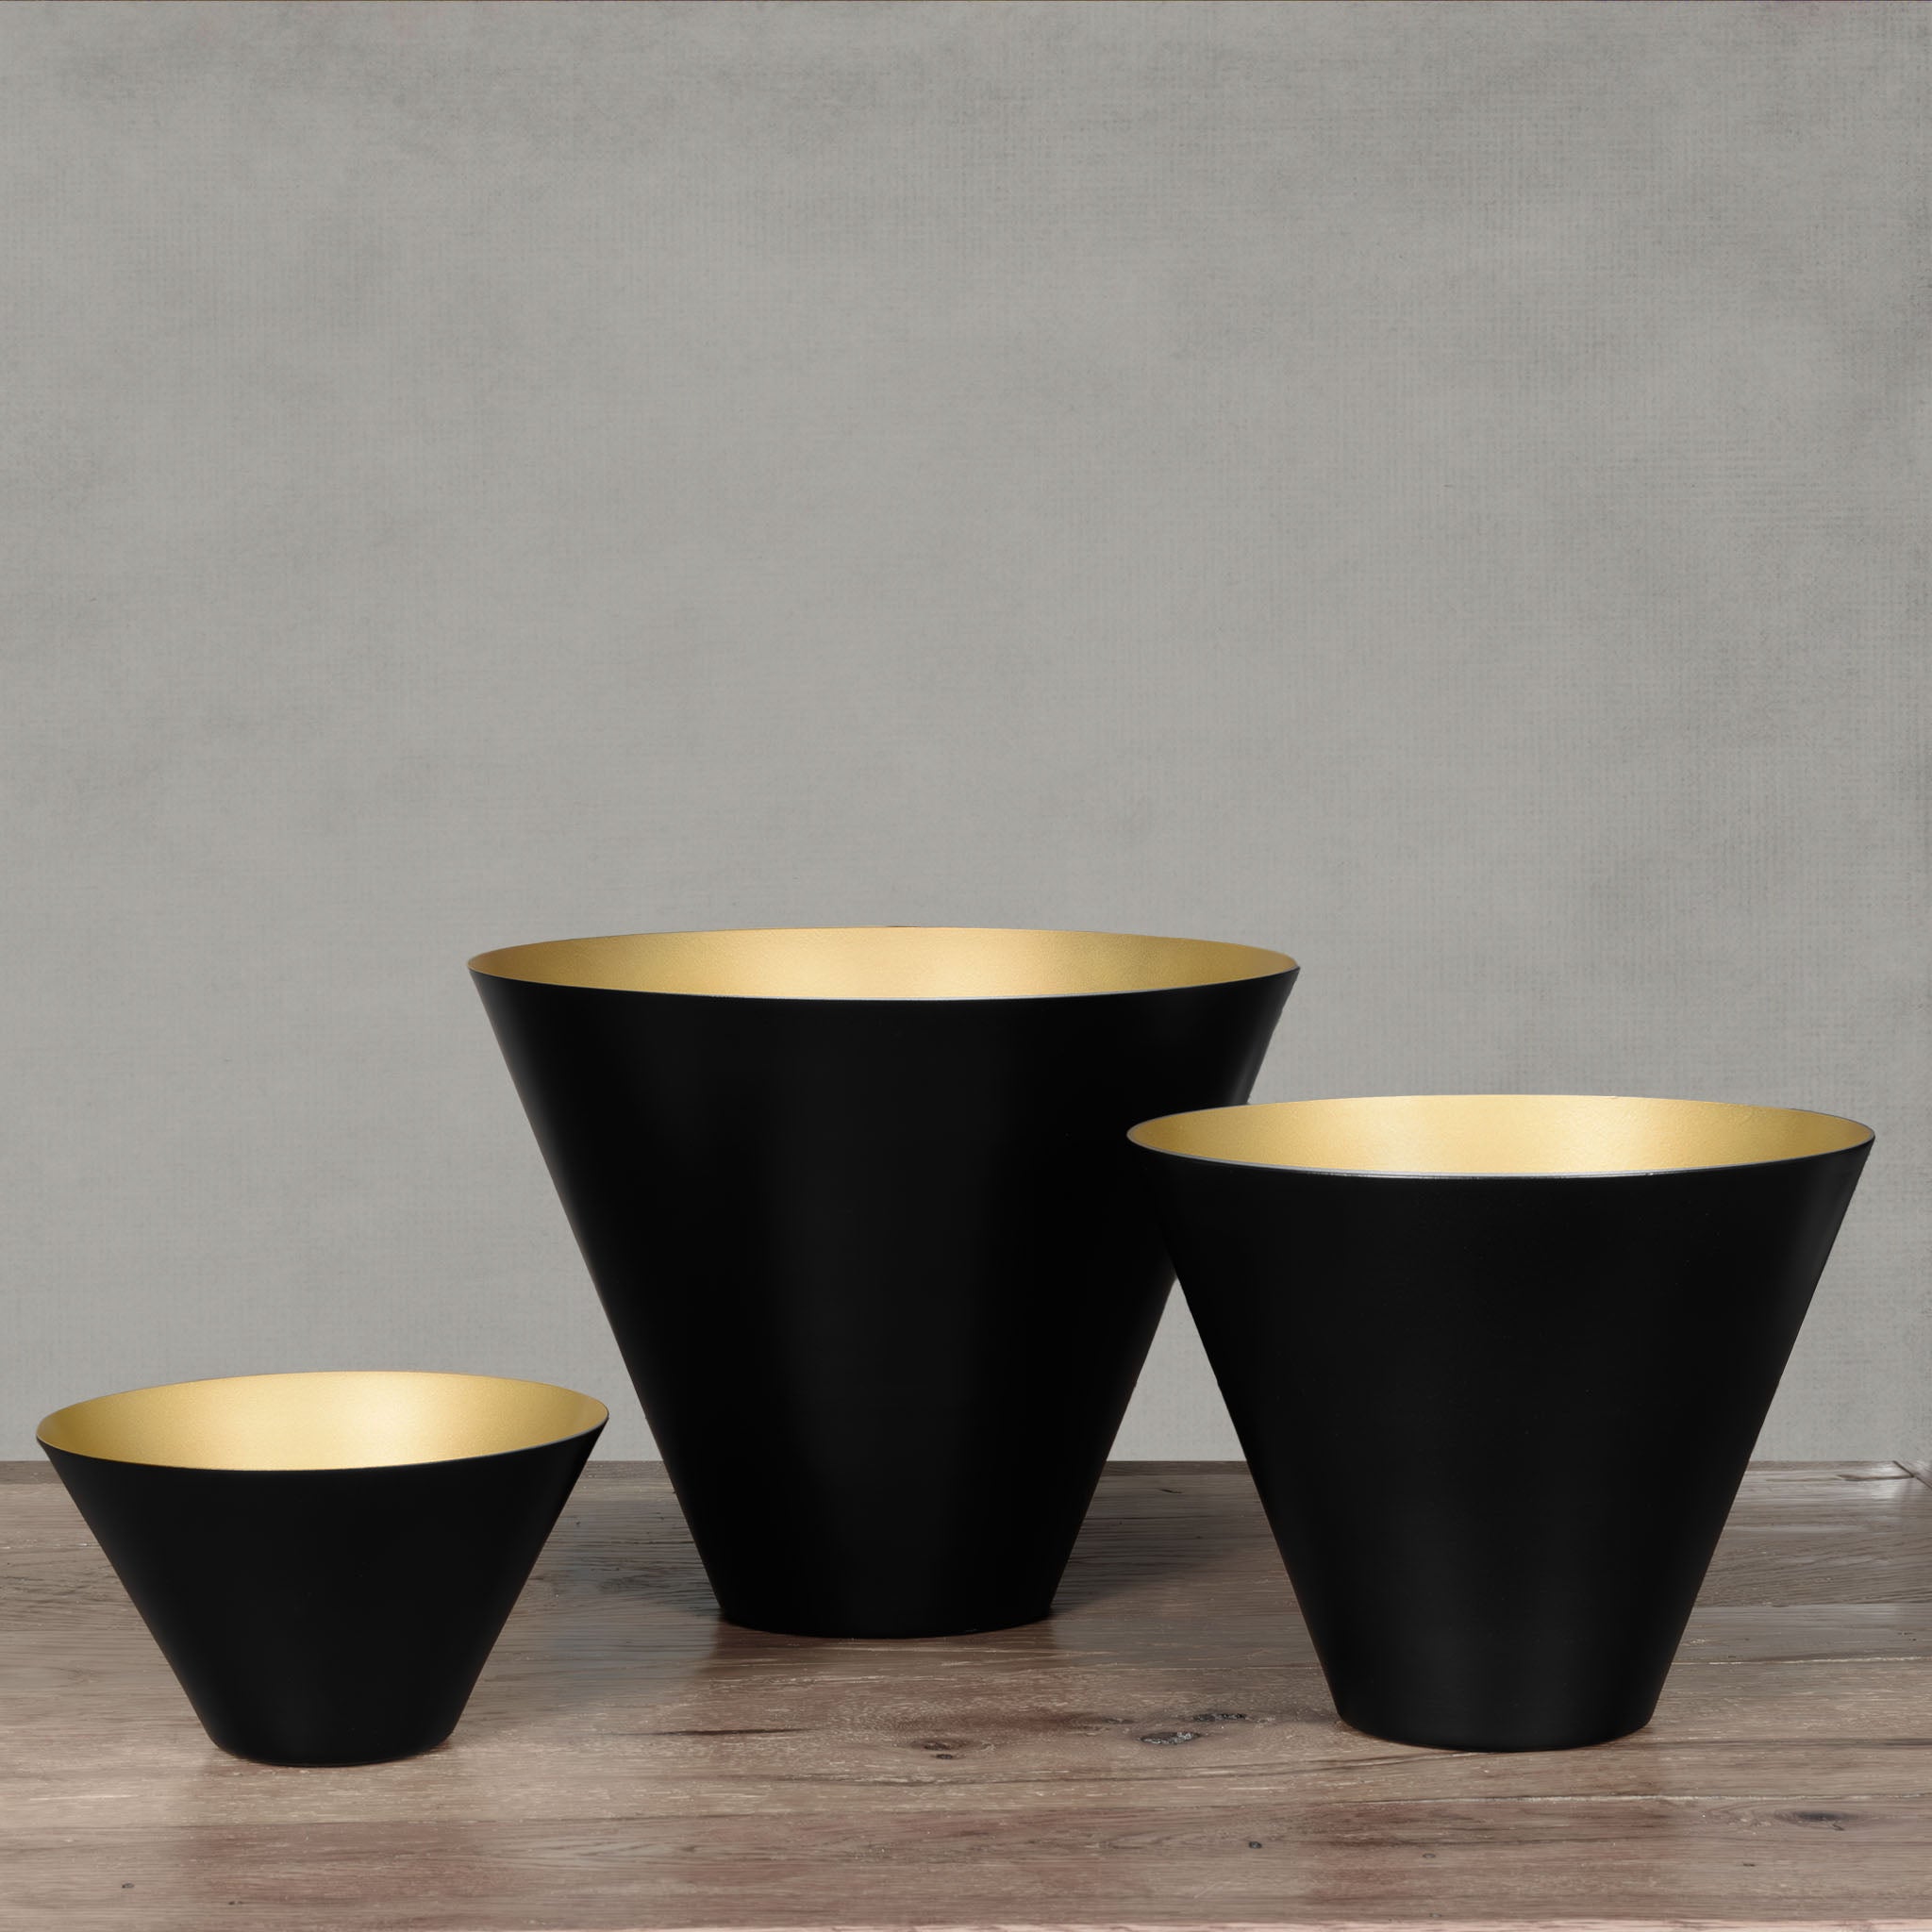 Decorative black and gold bowl set on wooden floor with gray background.